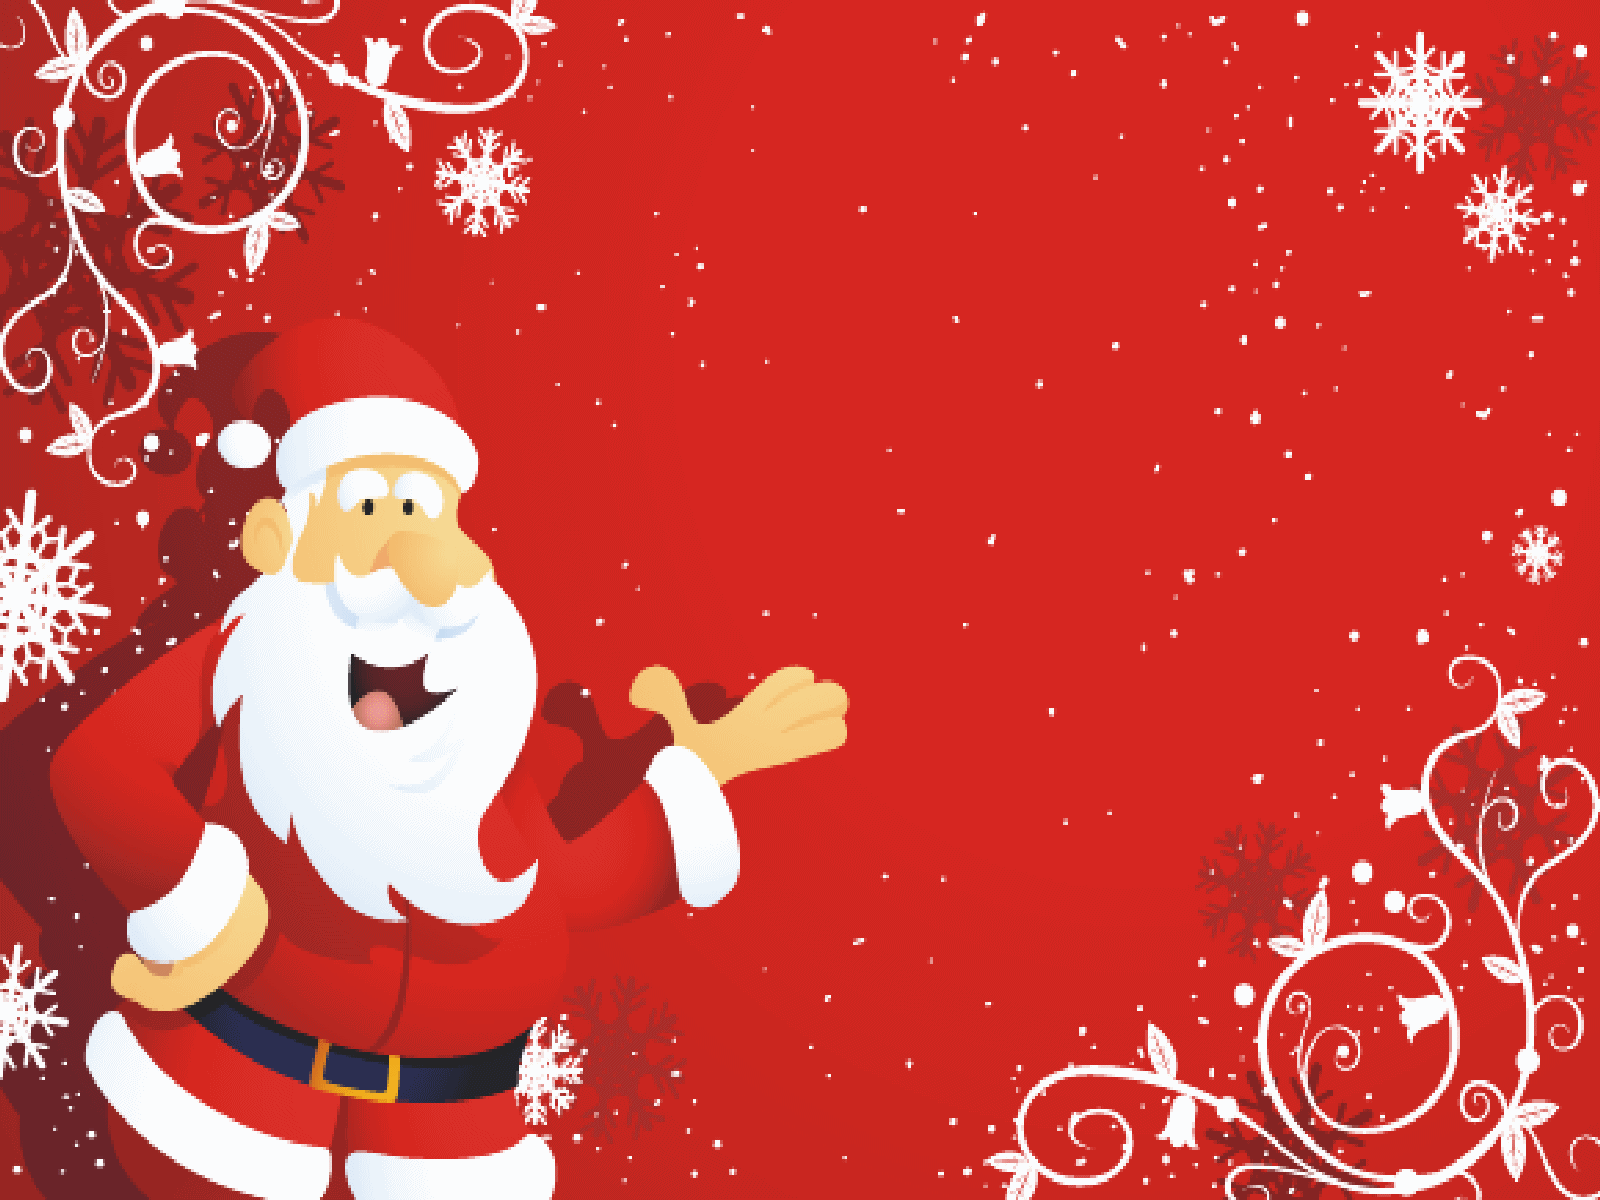 Christmas Background Wallpaper for Facebook